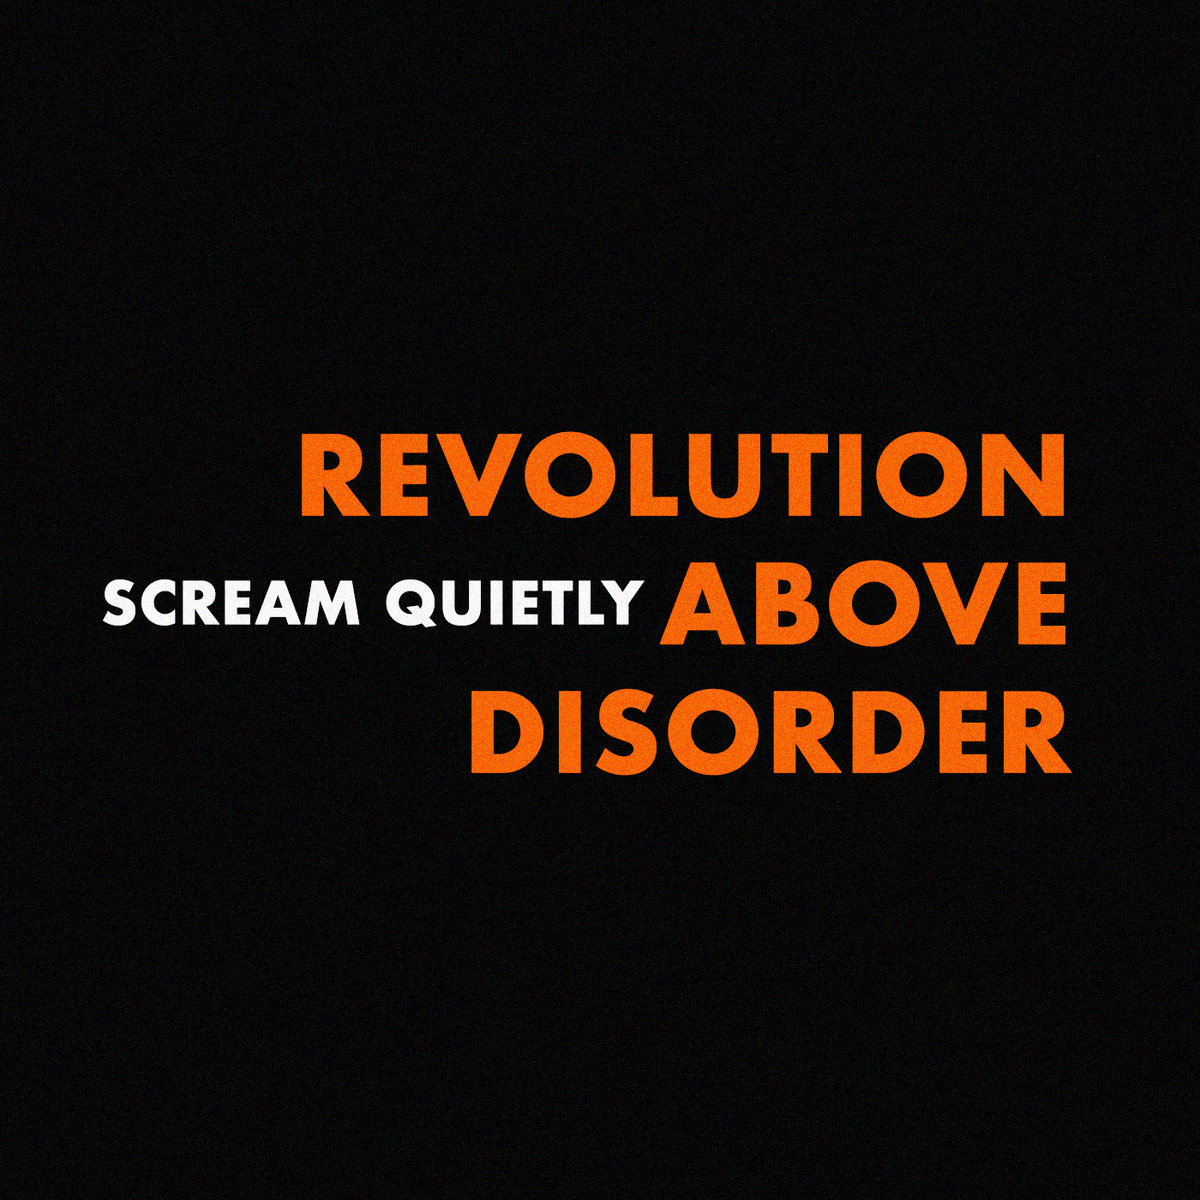 Post-punk shivers – Revolution Above Disorder – Scream Quietly (Television Personalities cover)